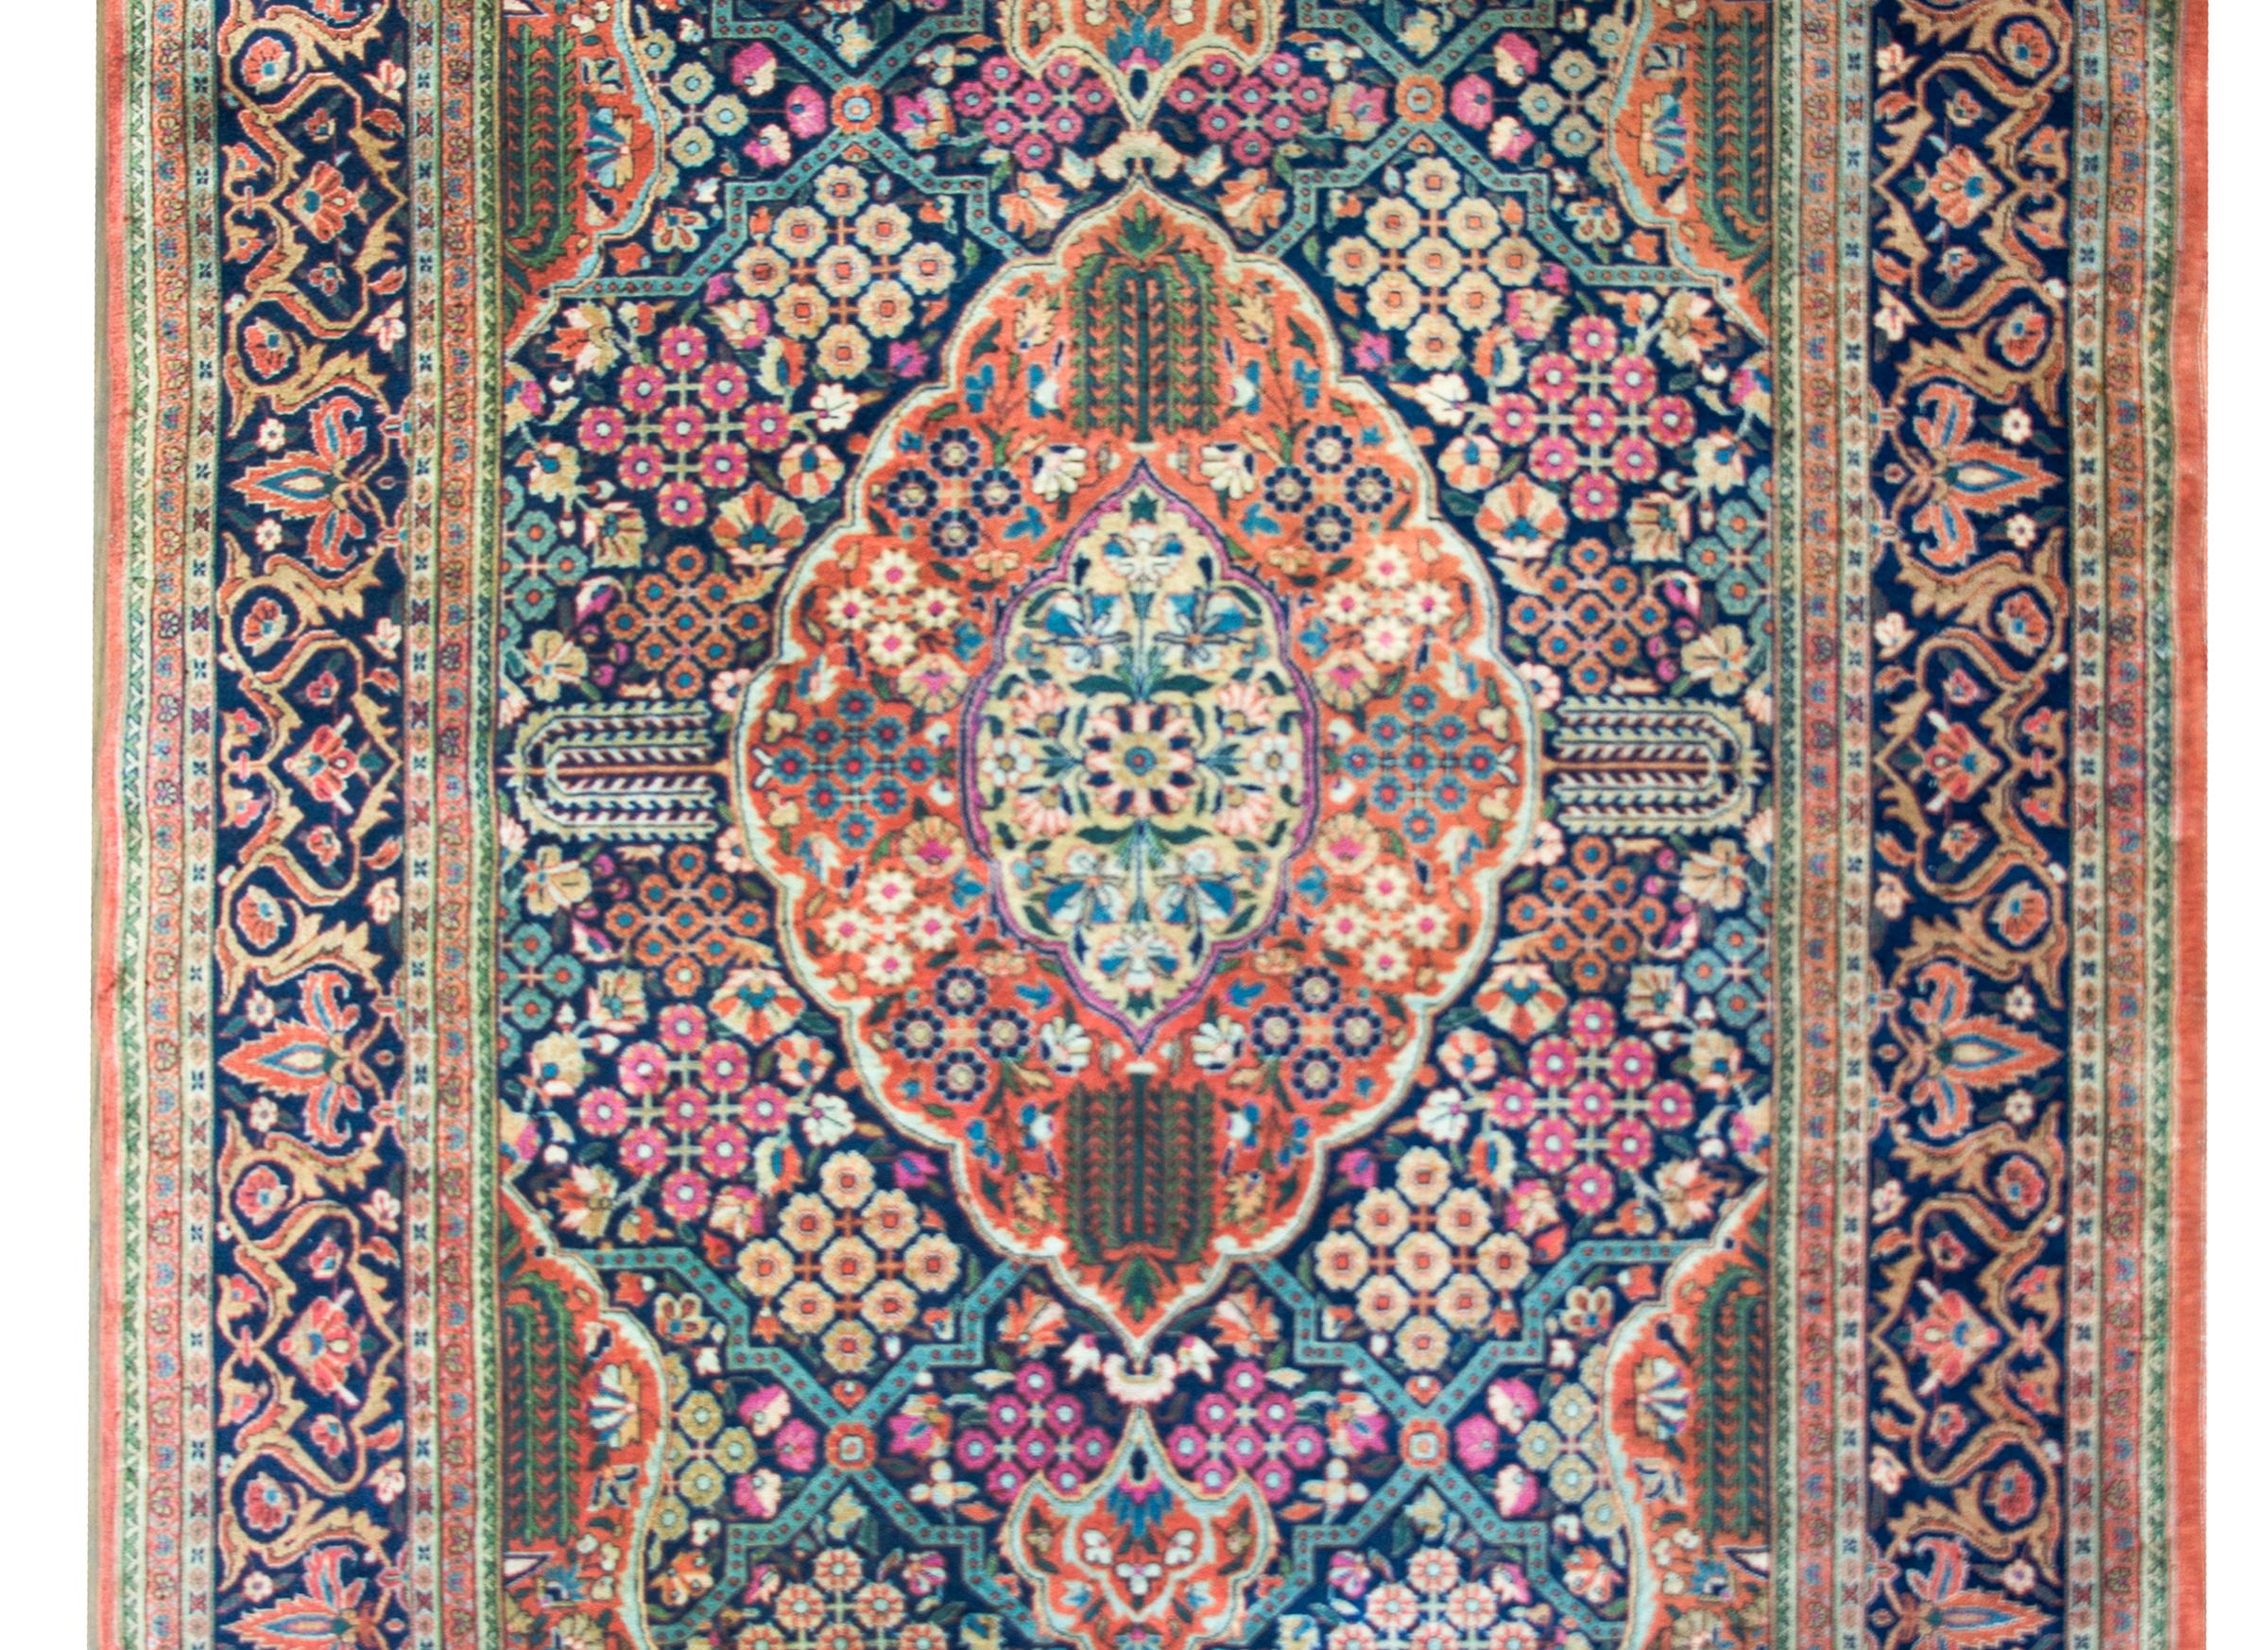 A stunning and rare early 20th century Dabir Kashan rug with the most incredible mirrors pattern with myriad willow trees, and stylized geometric patterned flowers all woven pink, light and dark indigo, cream, orange, and crimson.  The border is